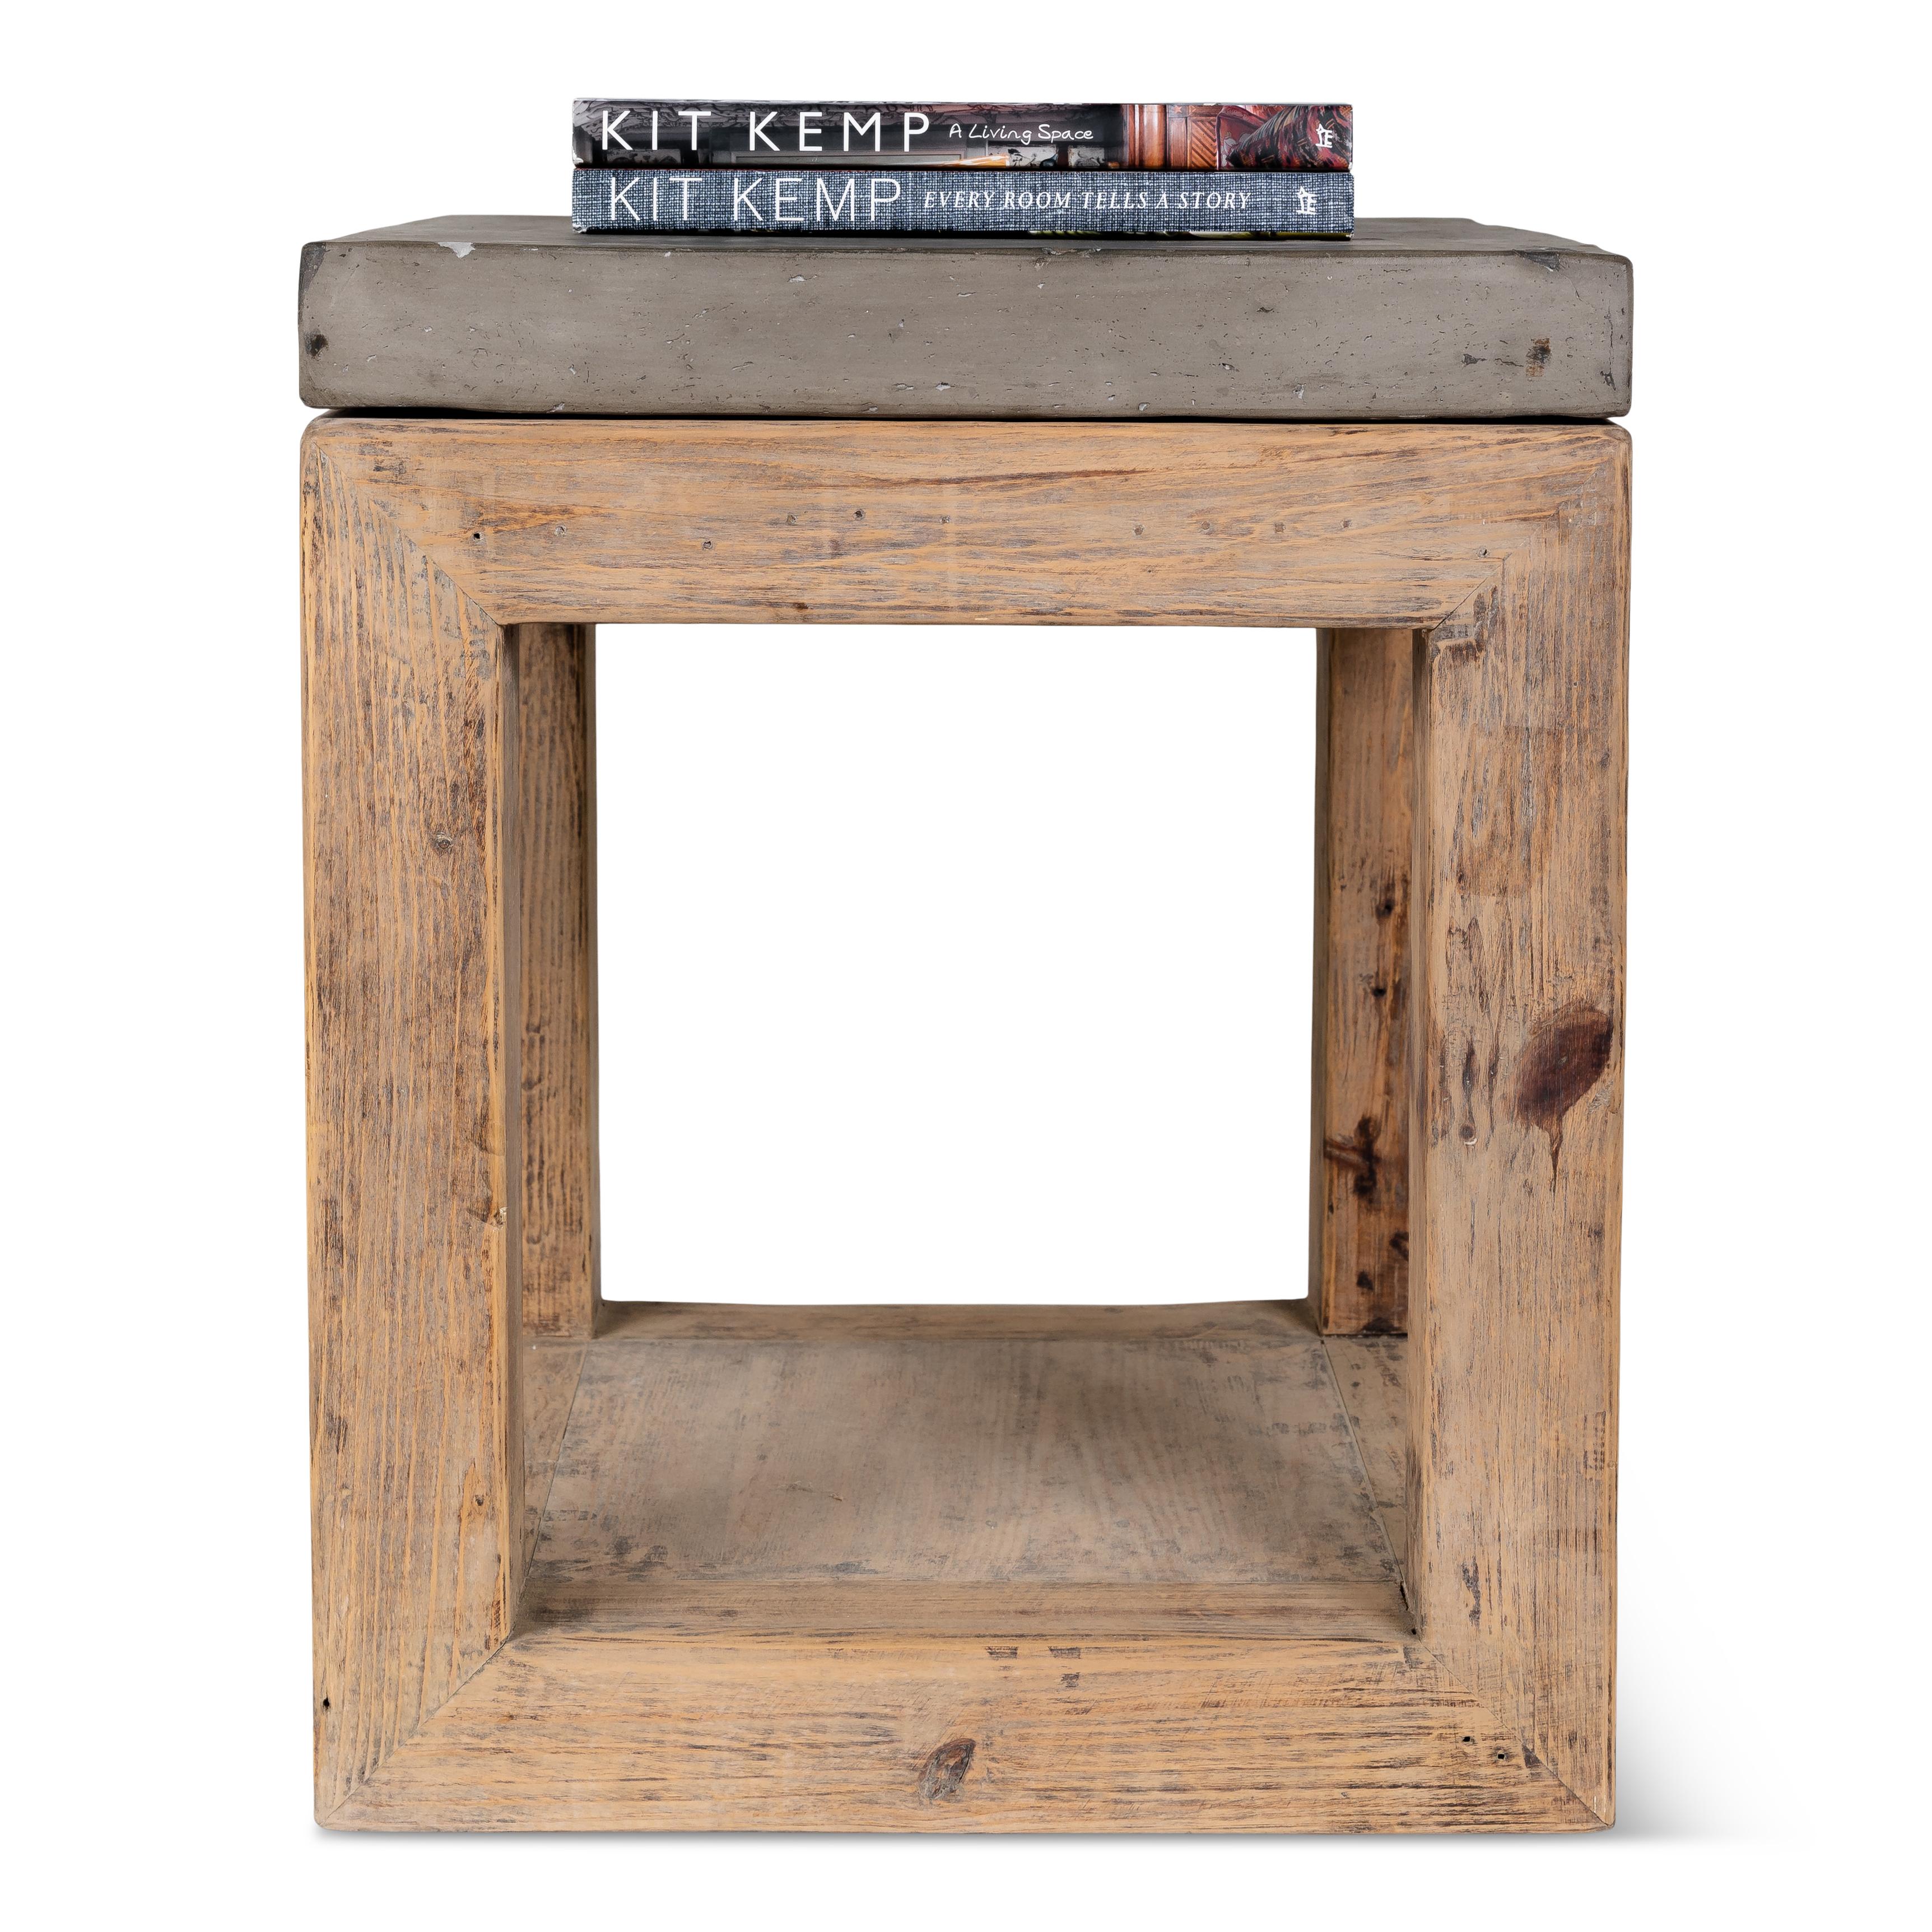 Organic Modern Geometric Form Elm End Table with Cast Concrete Top